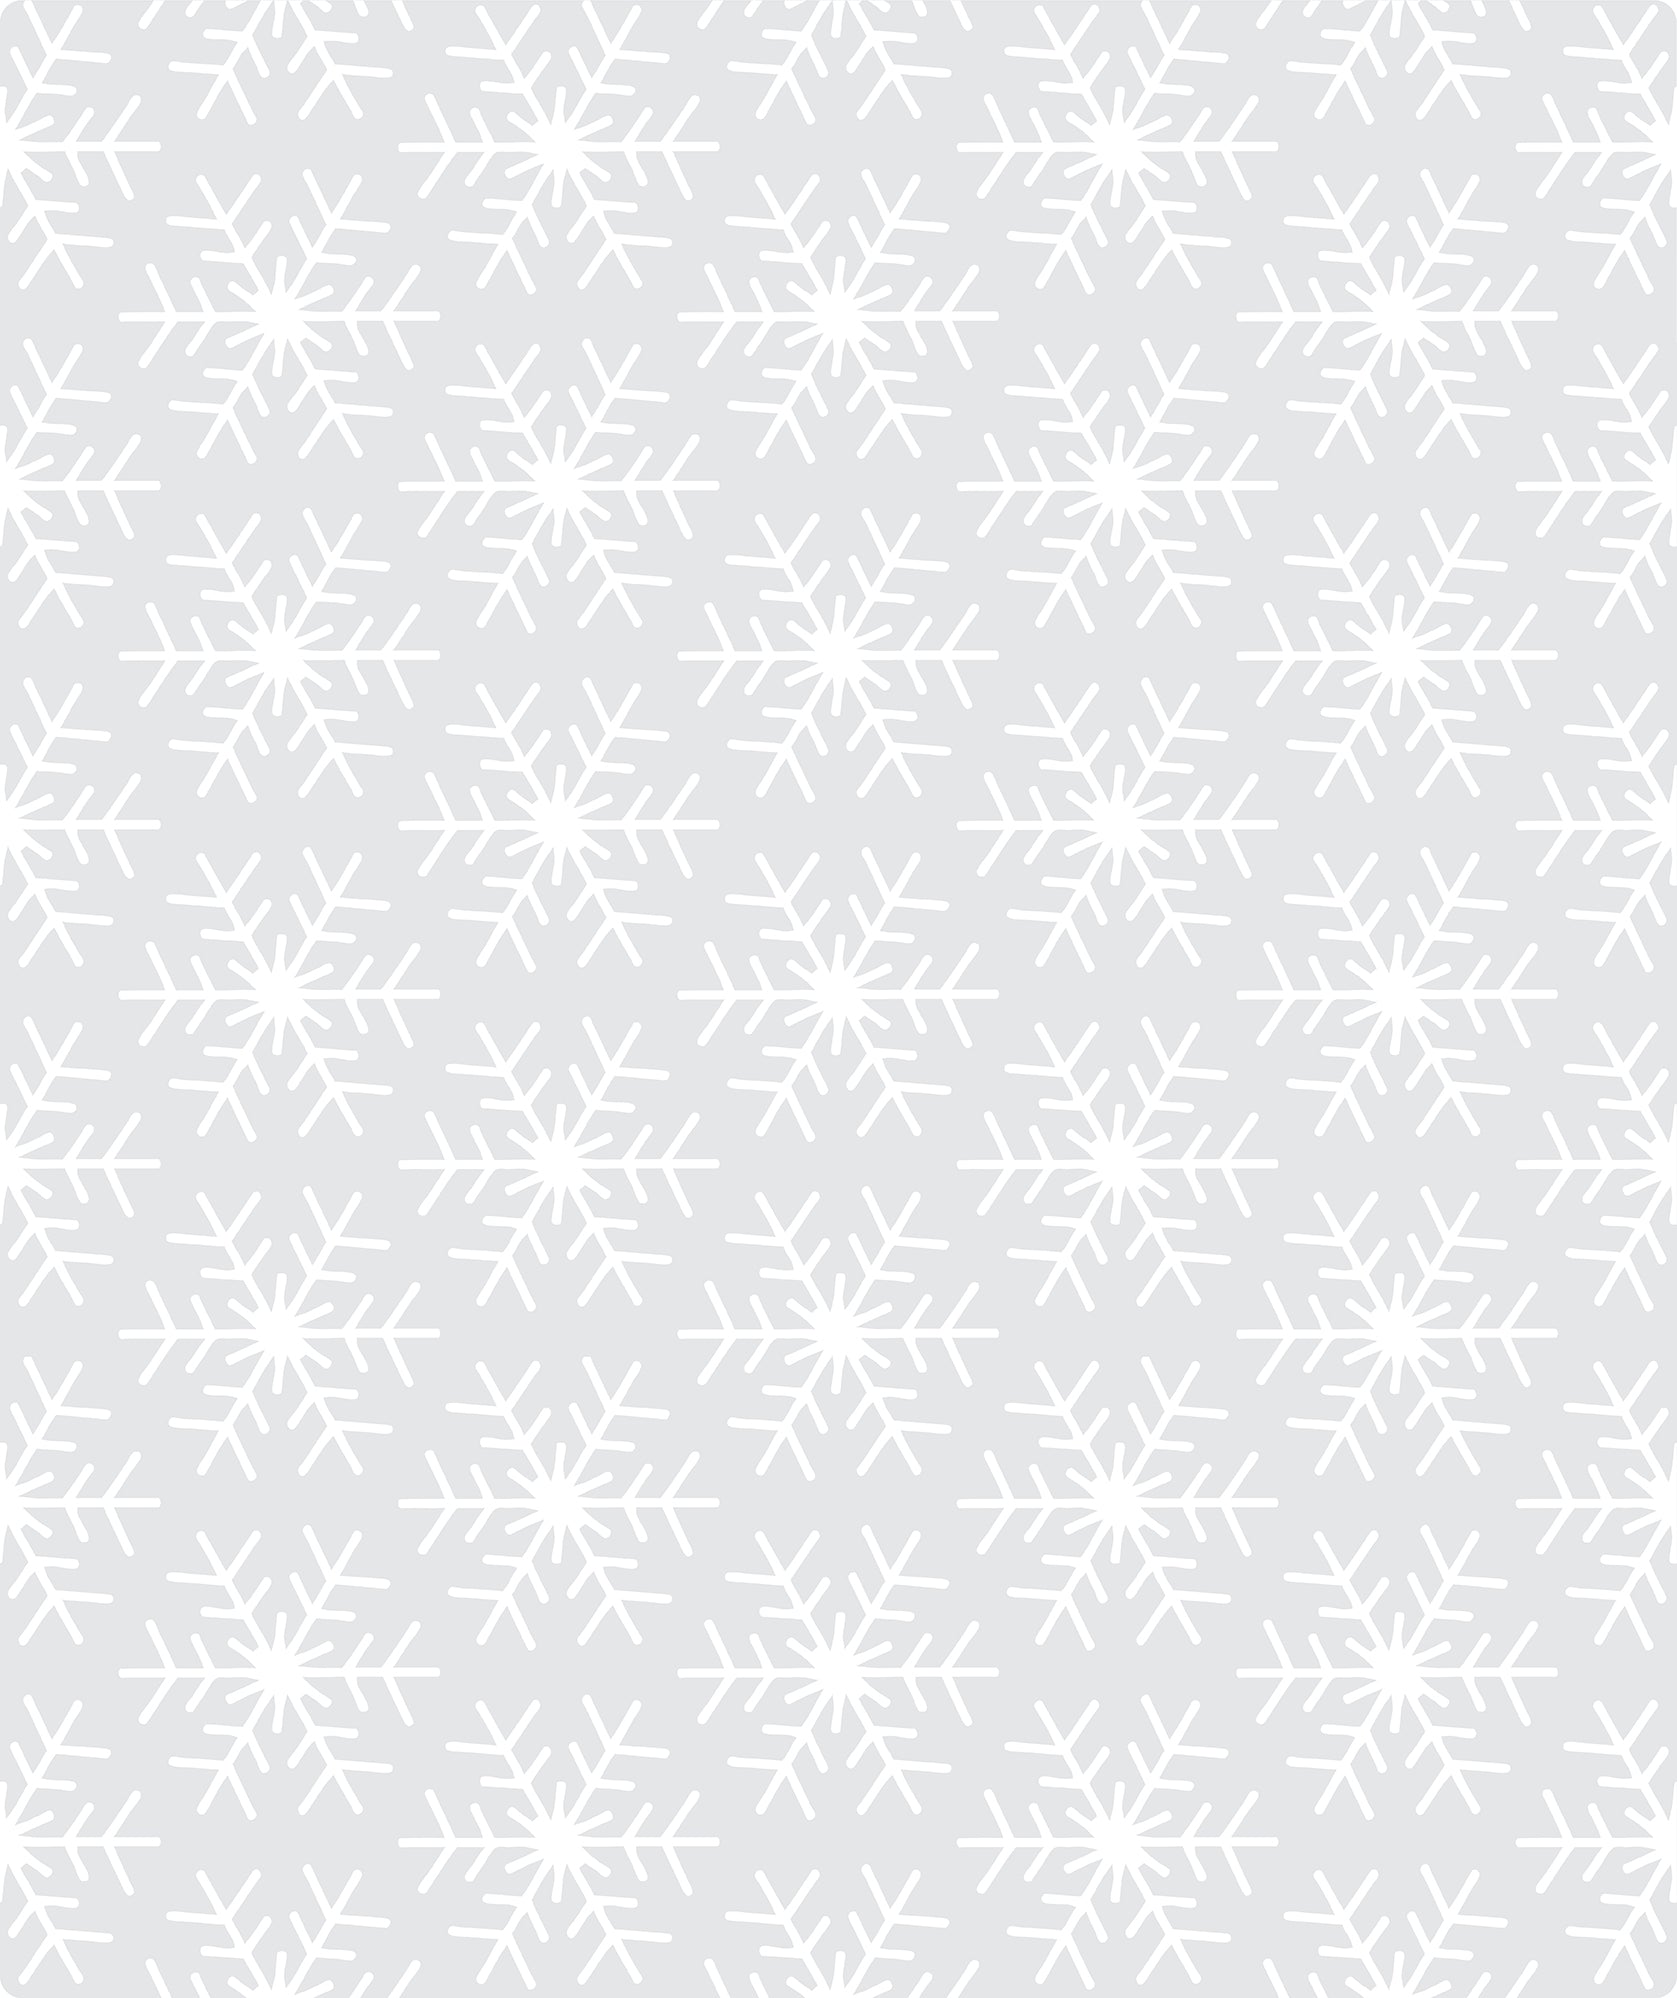 Holographic Snowflake White Foil Christmas Wrapping Paper Roll Wrapaholic Wholesale Ream